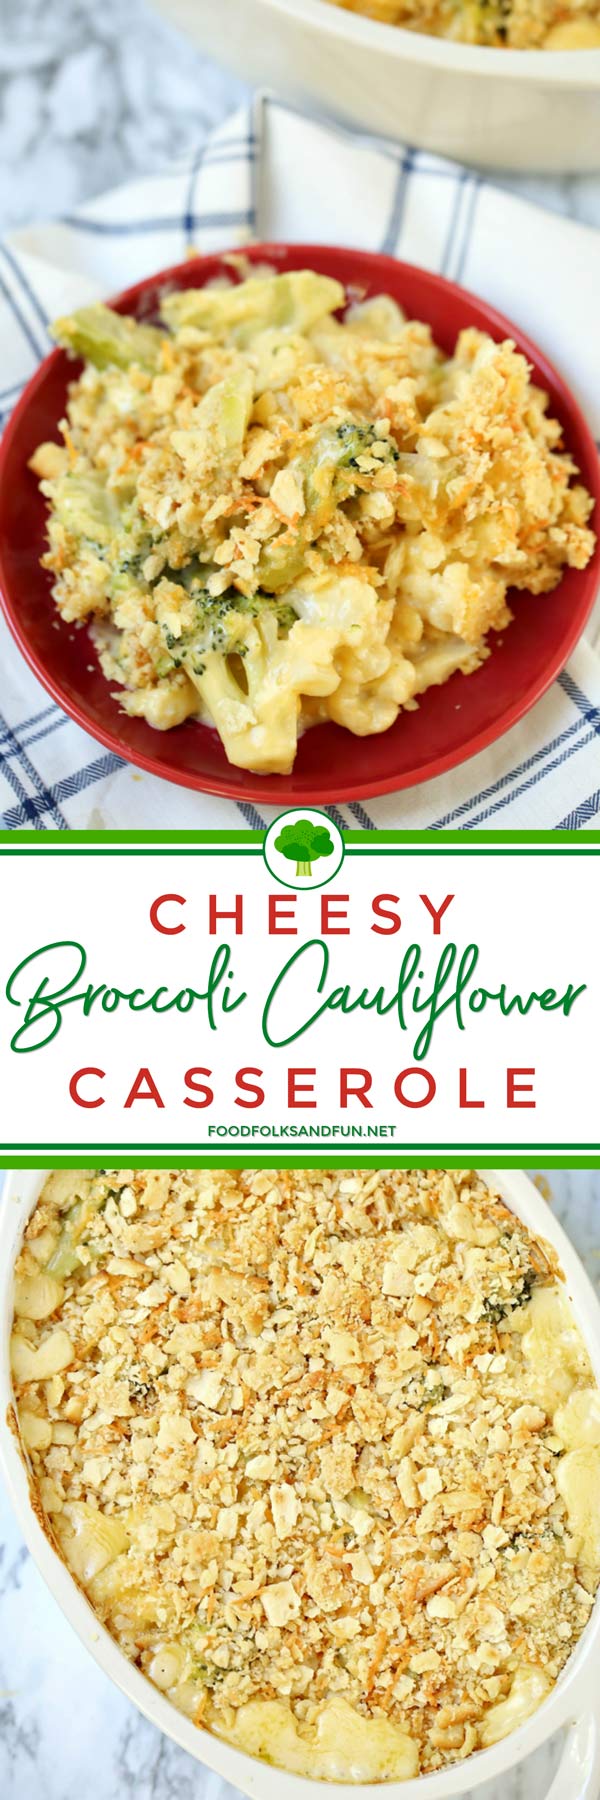 This Cheesy Broccoli Cauliflower Casserole is not only delicious but super quick & easy to make, too! Whether you’re hosting Thanksgiving or need a side dish to bring, this recipe will be a great addition to any Thanksgiving dinner! via @foodfolksandfun